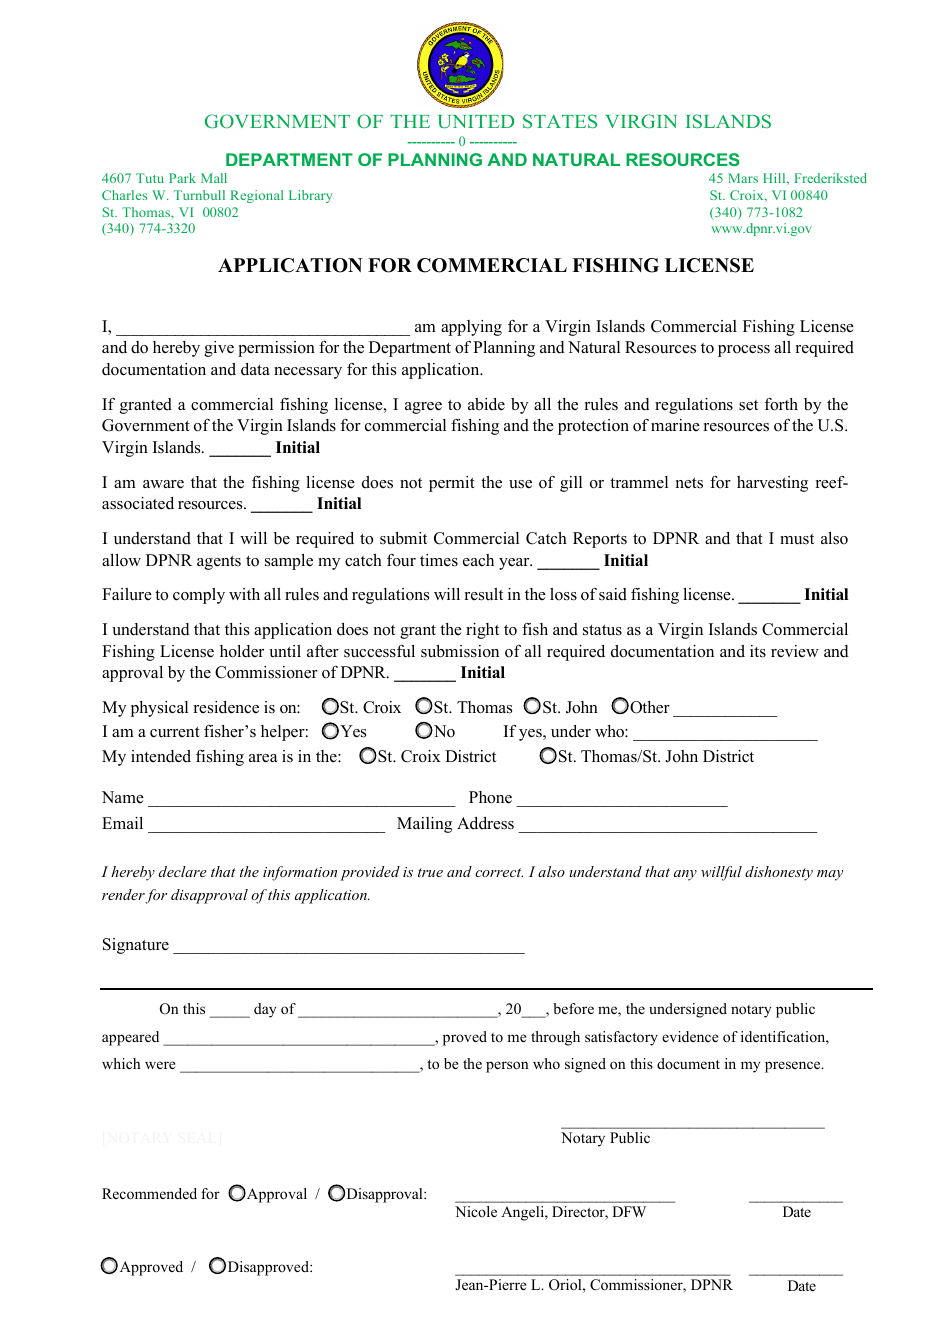 Application for Commercial Fishing License - Virgin Islands, Page 1